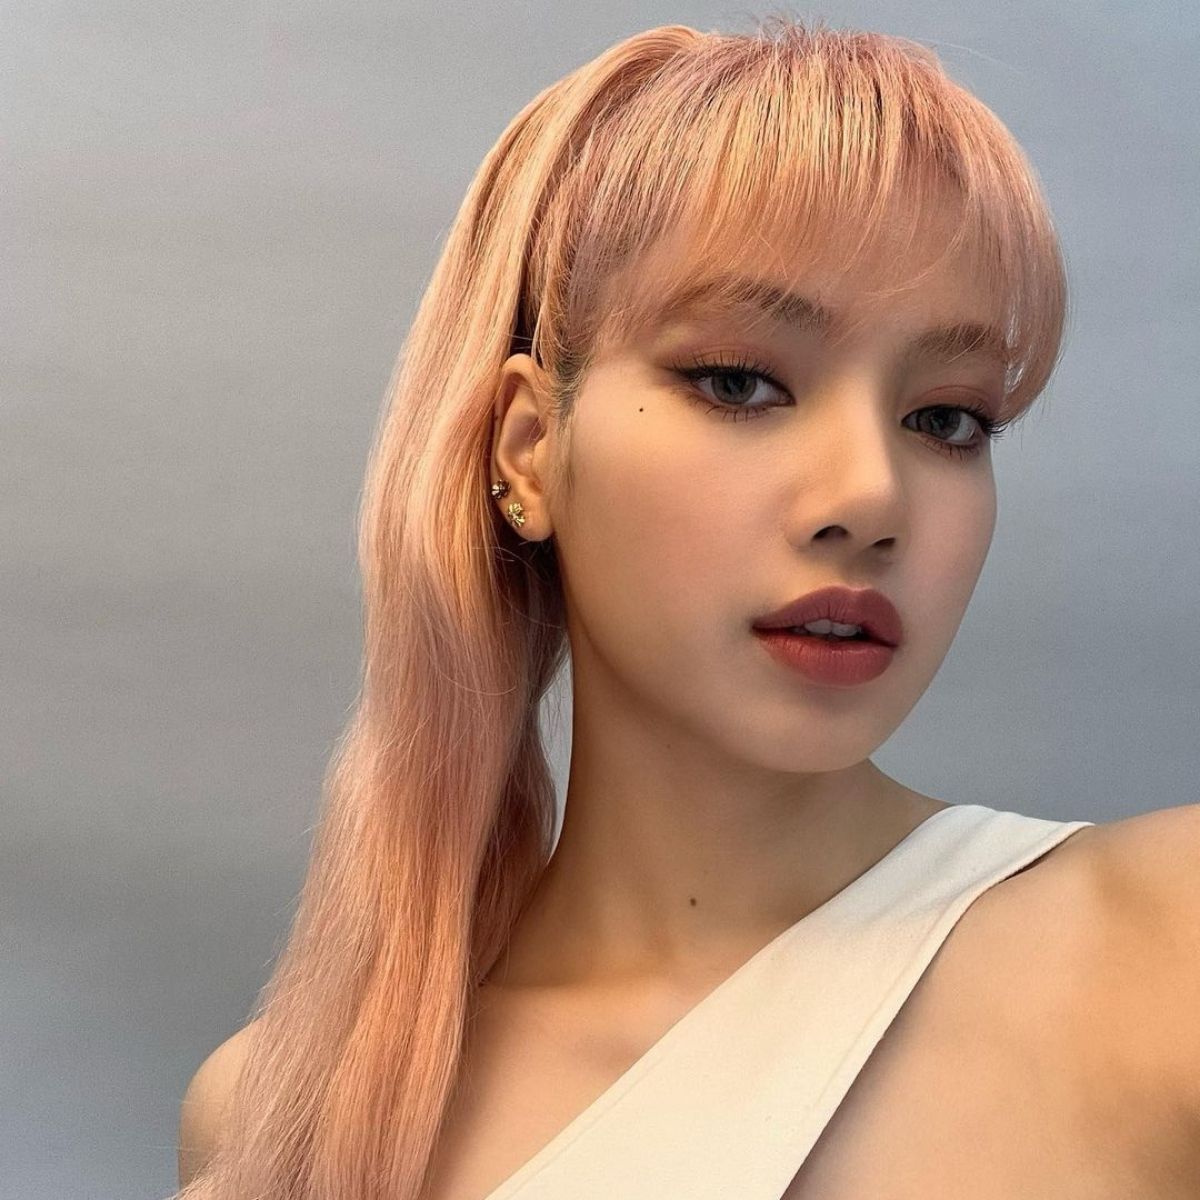 PHOTOS: BLACKPINK's Lisa owns the selfie game with her sleek style ...